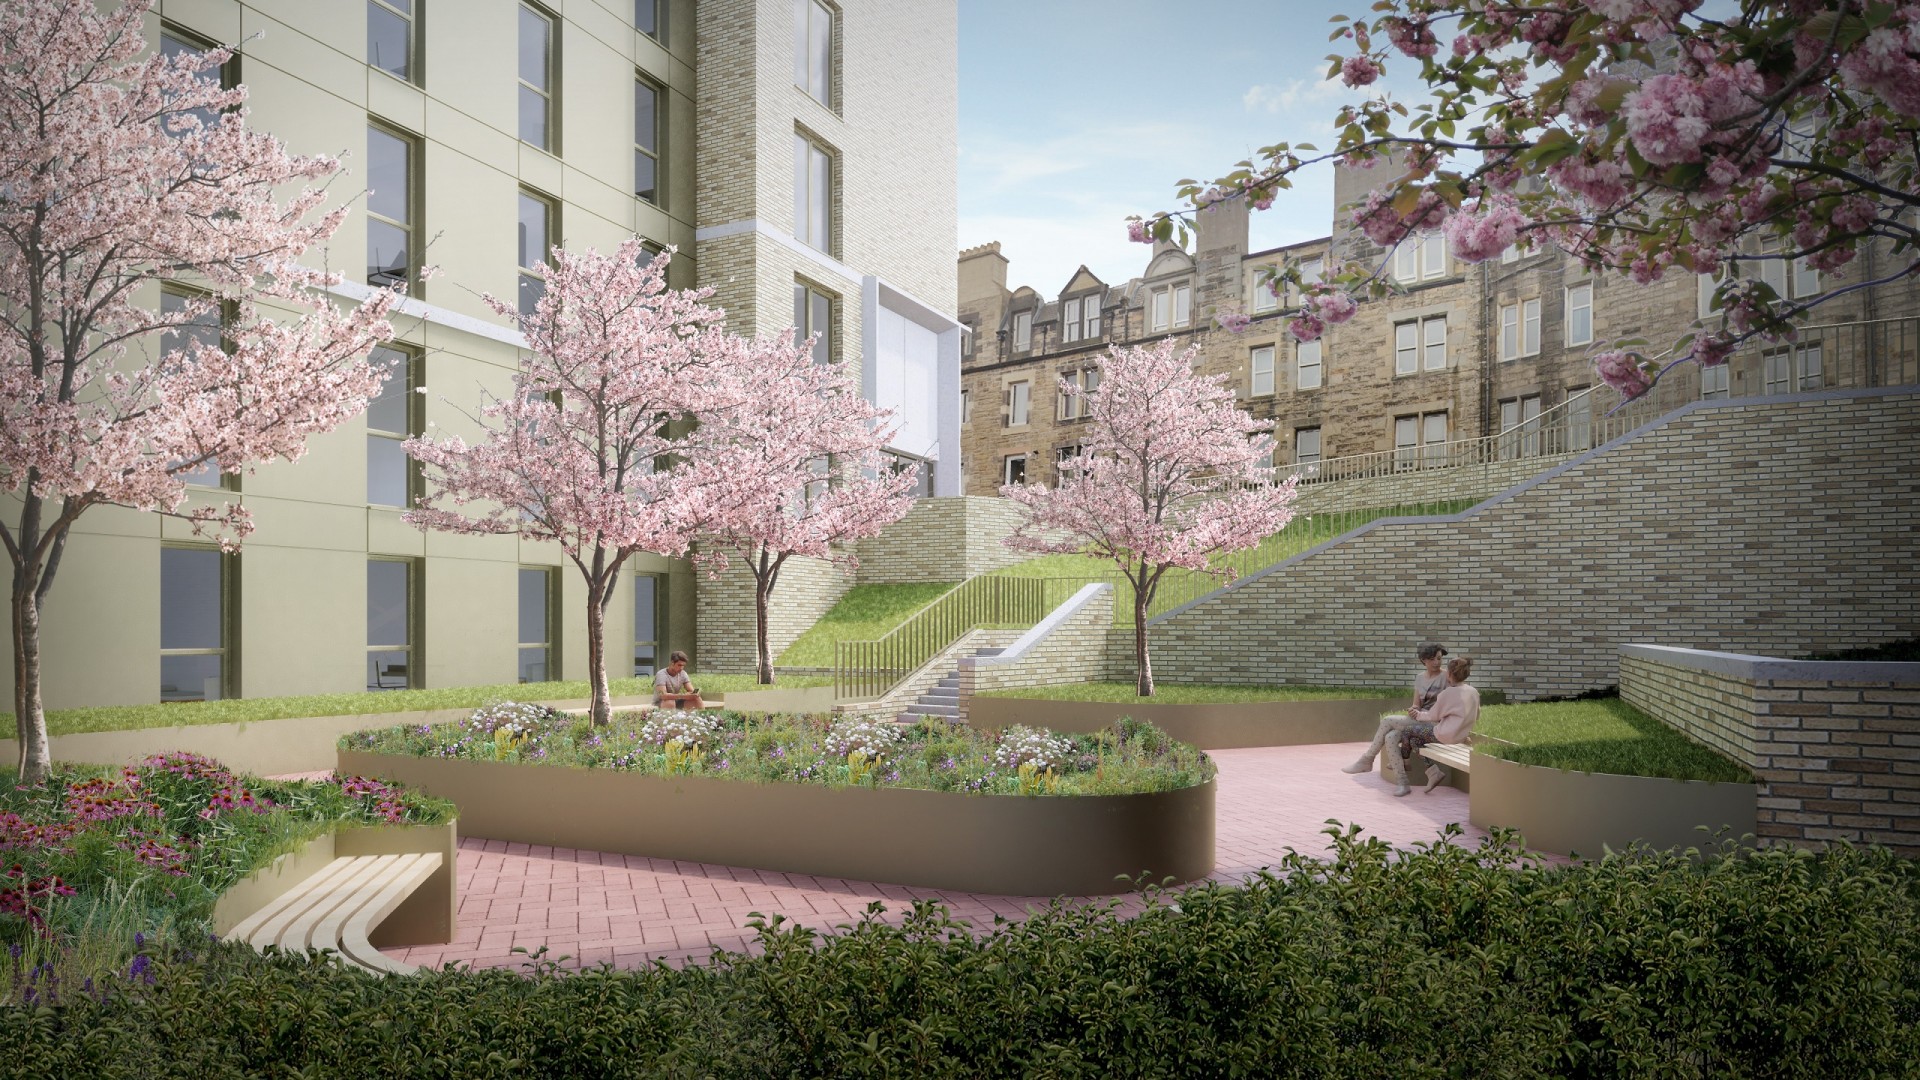 Caledonian Trust drops price for Meadowbank student accommodation site by £3.5m